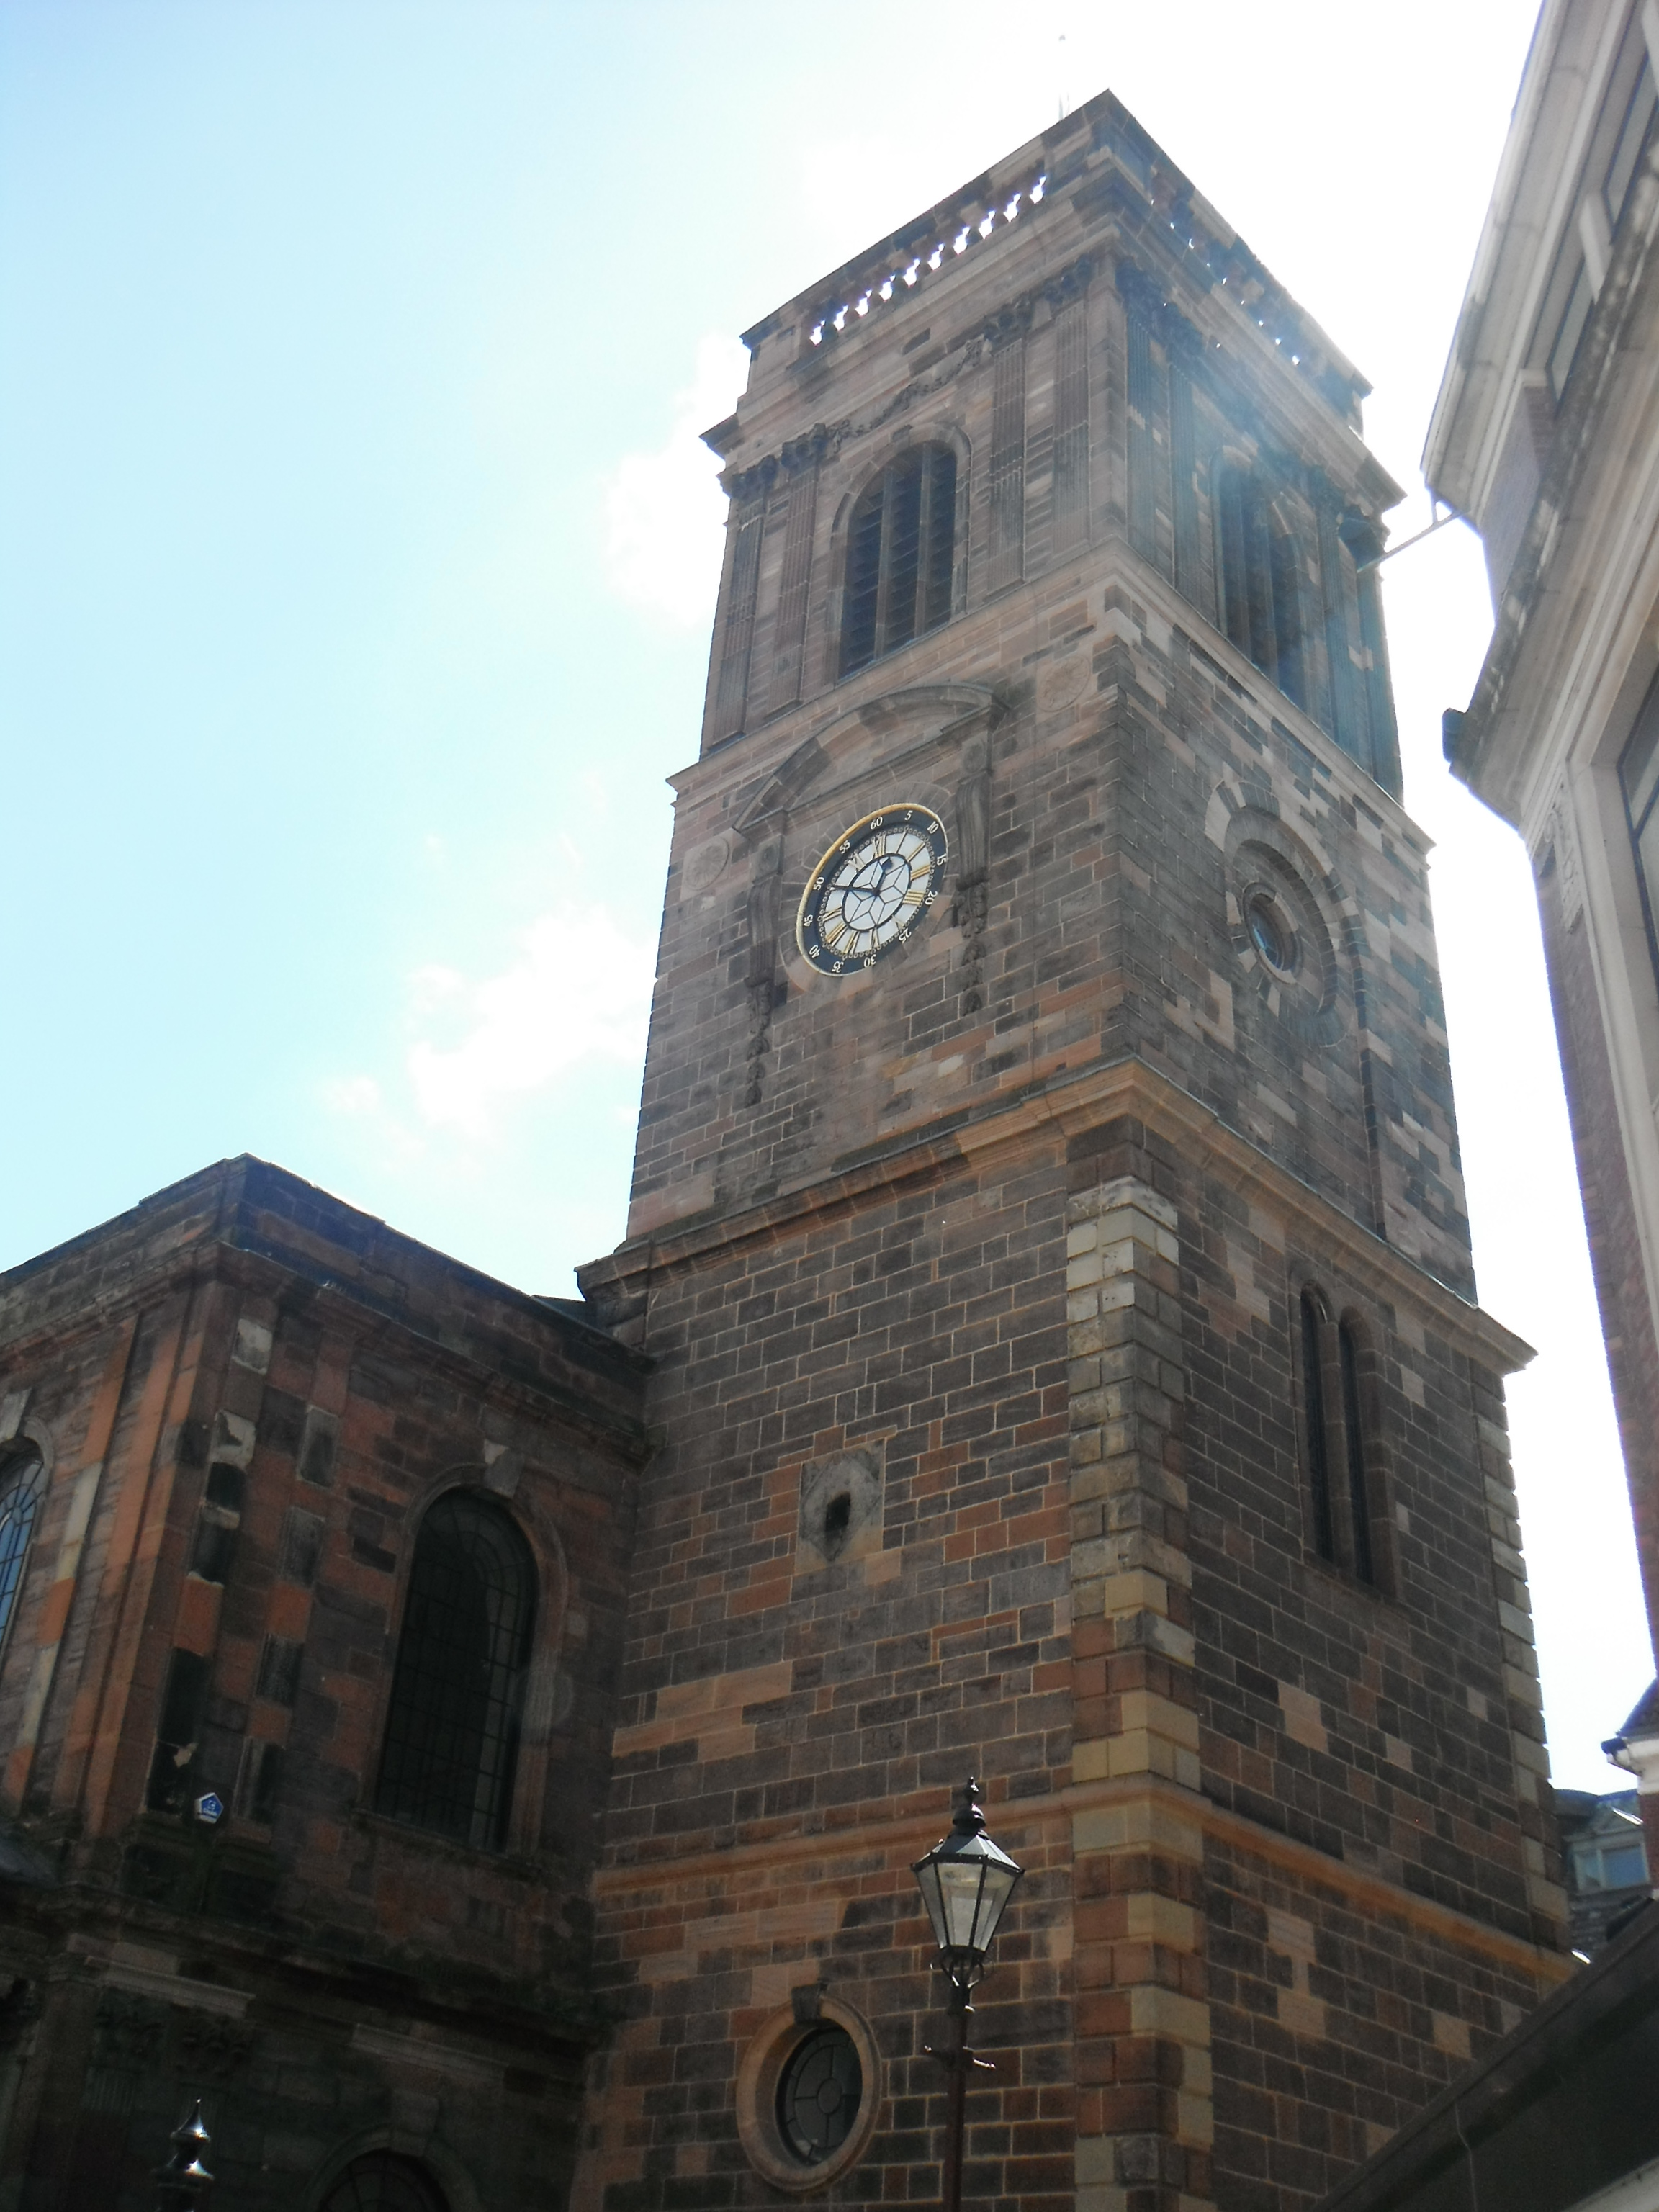 Photo taken by me – St Anne’s Church, Manchester 